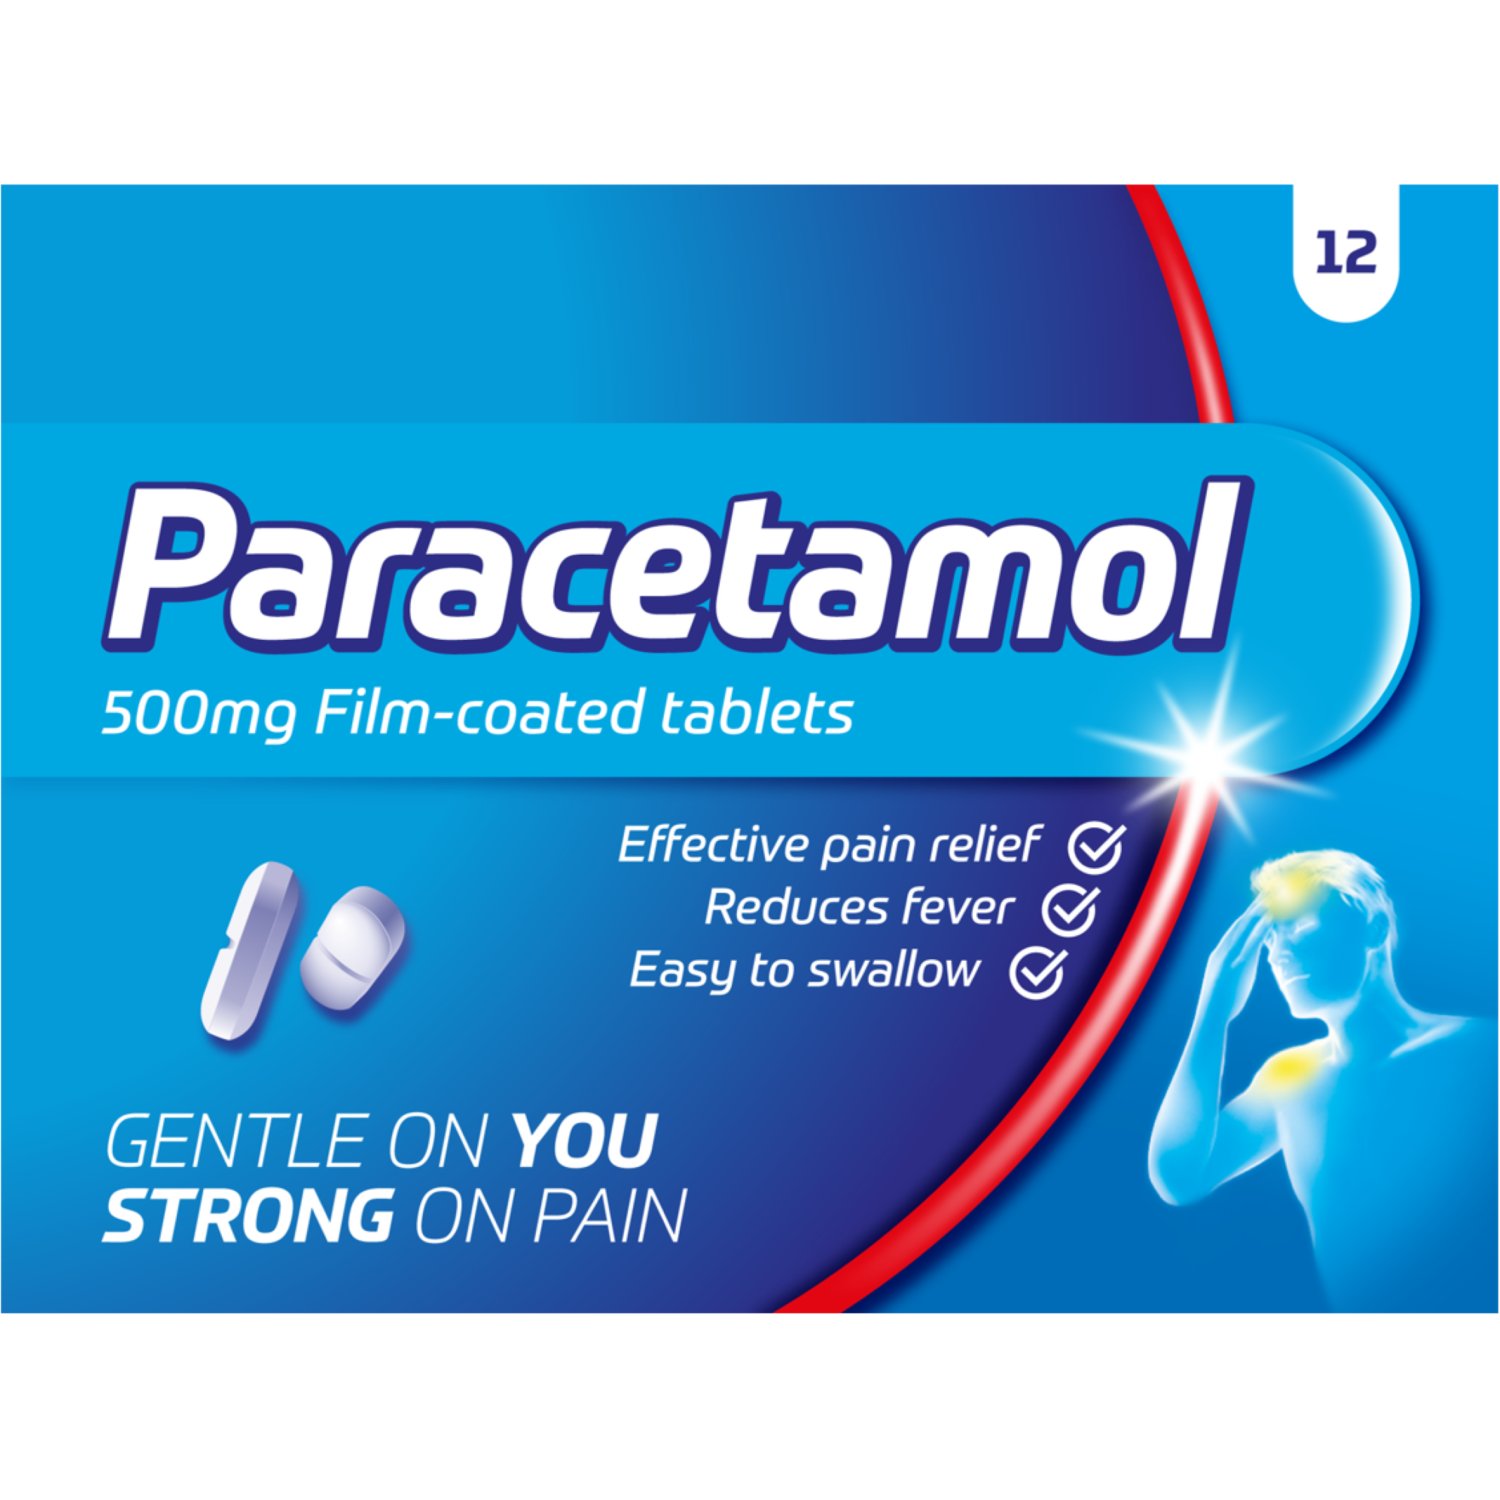  Provides effective pain relief.    Paracetamol tablets that are recommended for use in the short-term management of headaches, including migraine and tension headaches, backache, rheumatic and muscle pain, period pains, nerve pains, toothache and for relieving fever, aches and pains of colds and flu.  The Paracetamol 500 mg tablets are coated and specifically shaped for easy swallowing.    Gentle on the stomach   
1. Provides effective pain relief,
2. Paracetamol tablets that are recommended for use in the short-term management of headaches.
3. Also for migraine and tension headaches, backache, rheumatic and muscle pain, period pains, nerve pains, toothache and for relieving fever, aches and pains of colds and flu.
4. The Paracetamol 500 mg tablets are coated and specifically shaped for easy swallowing.
5. Gentle on the stomach.